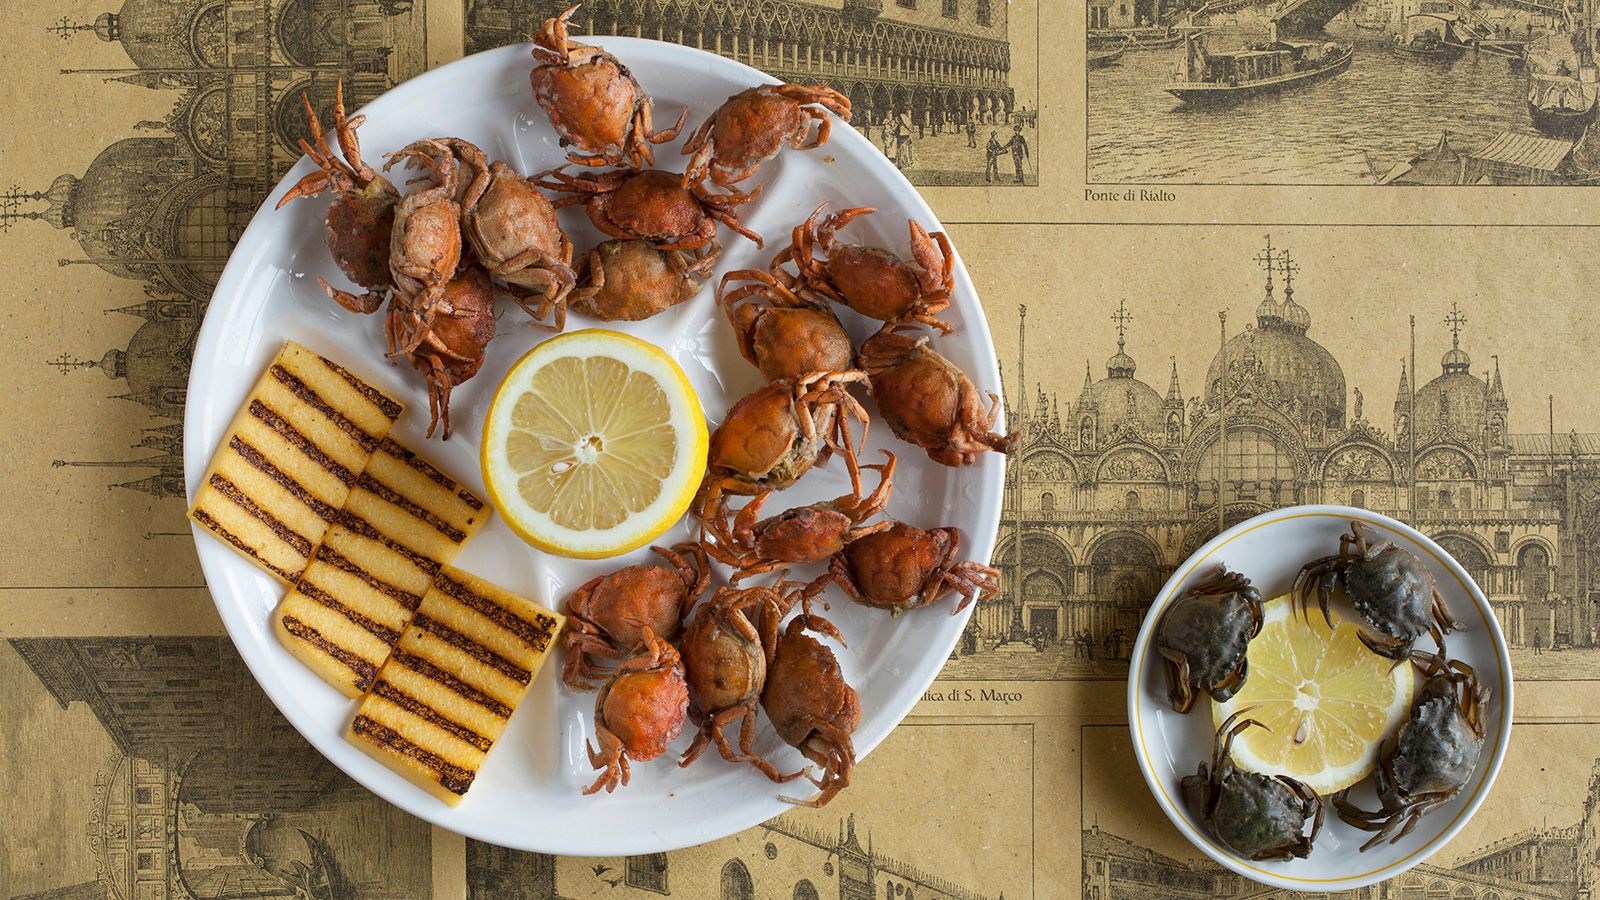 <strong>Feeling crabby:</strong> Moeche are tiny soft-shell crabs eaten in Venice.